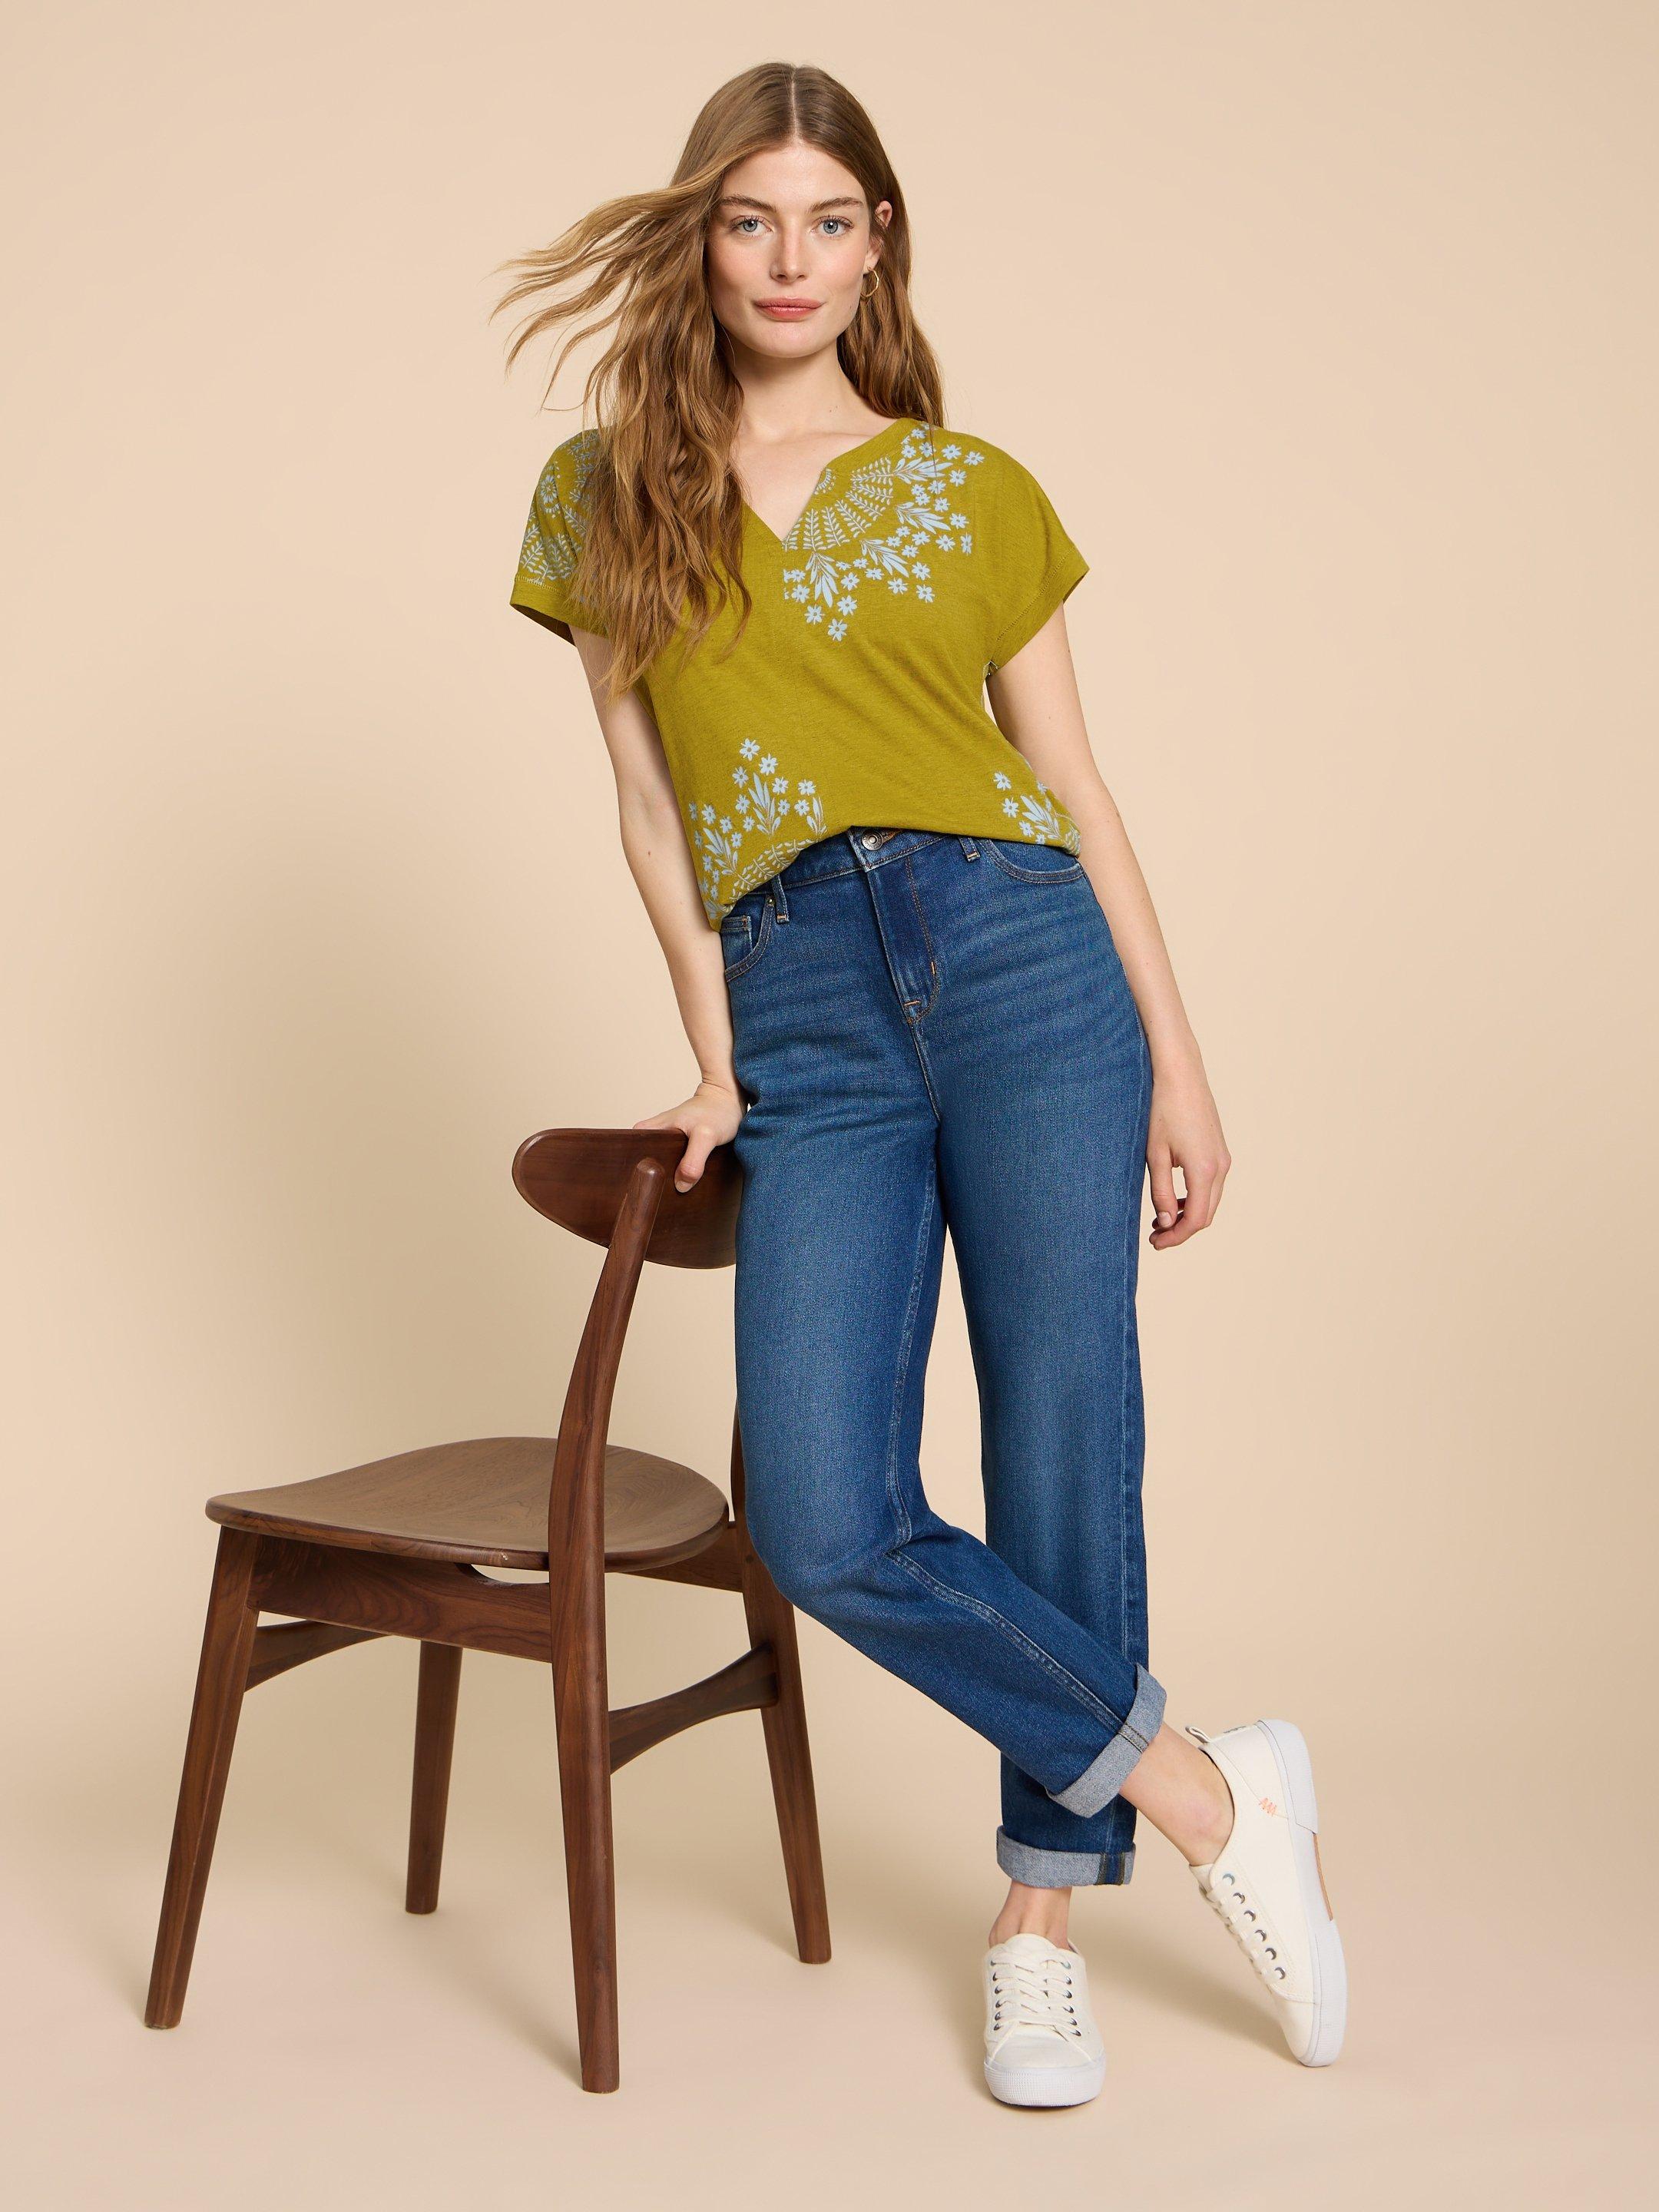 NELLY NOTCH NECK COTTON TEE in CHART PR - MODEL DETAIL